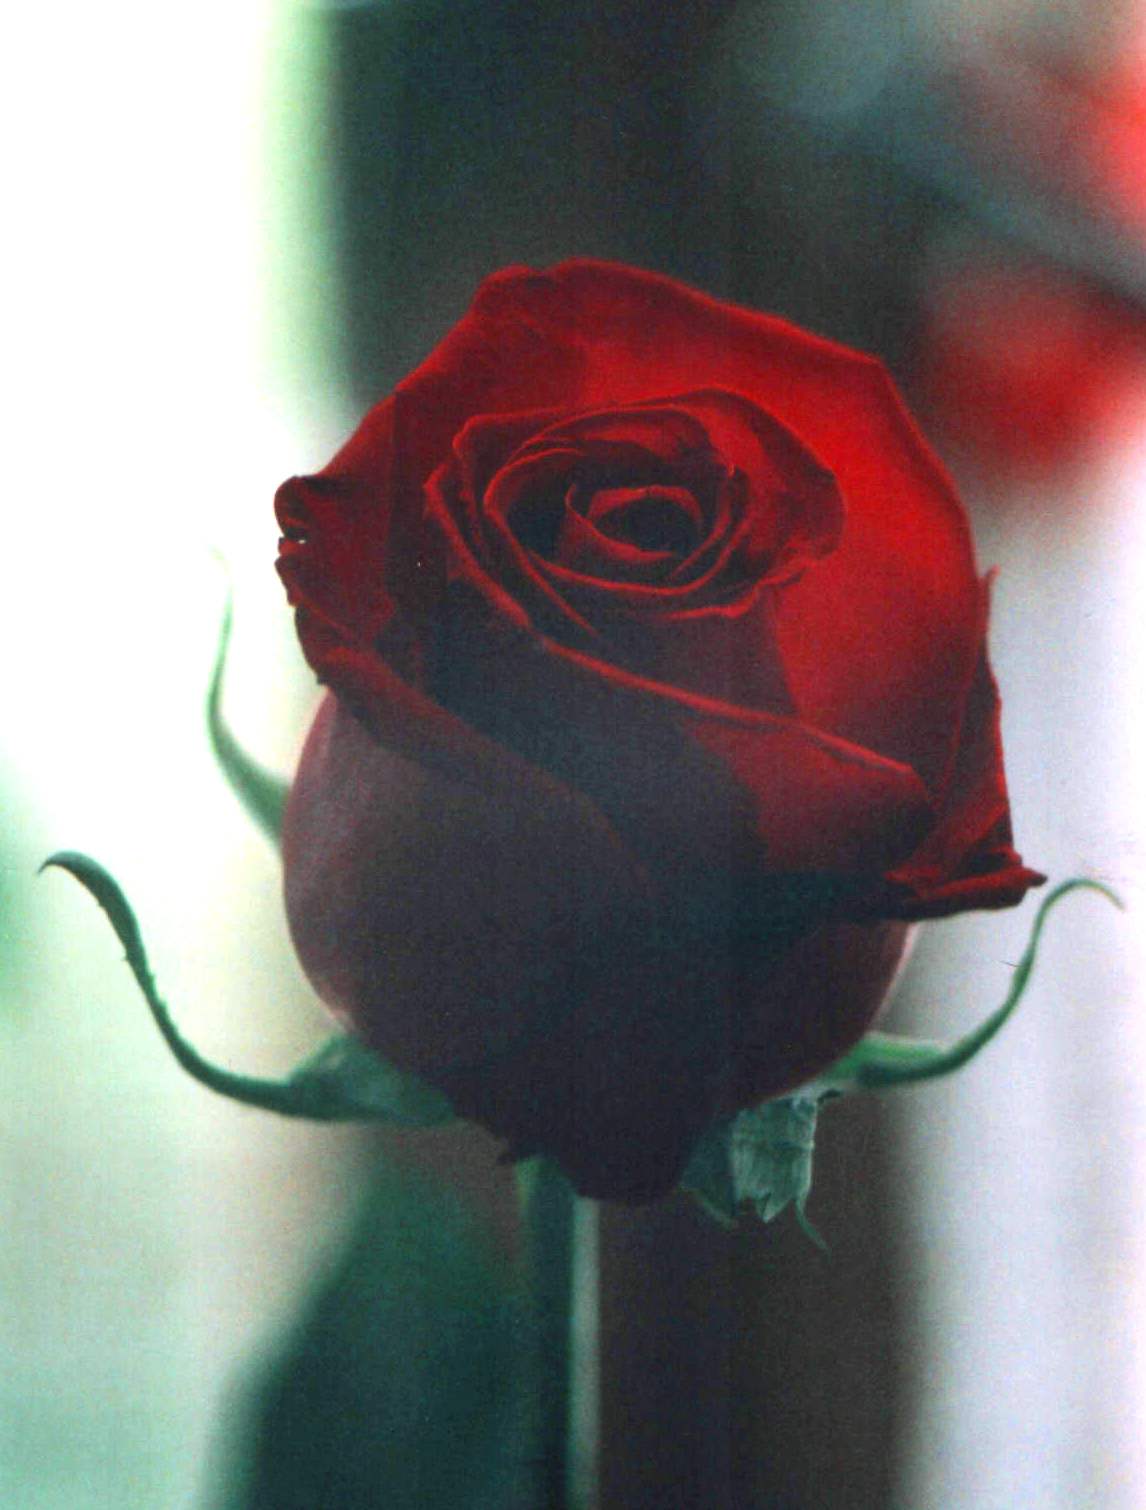 The Rose
---------
 (  ,      )